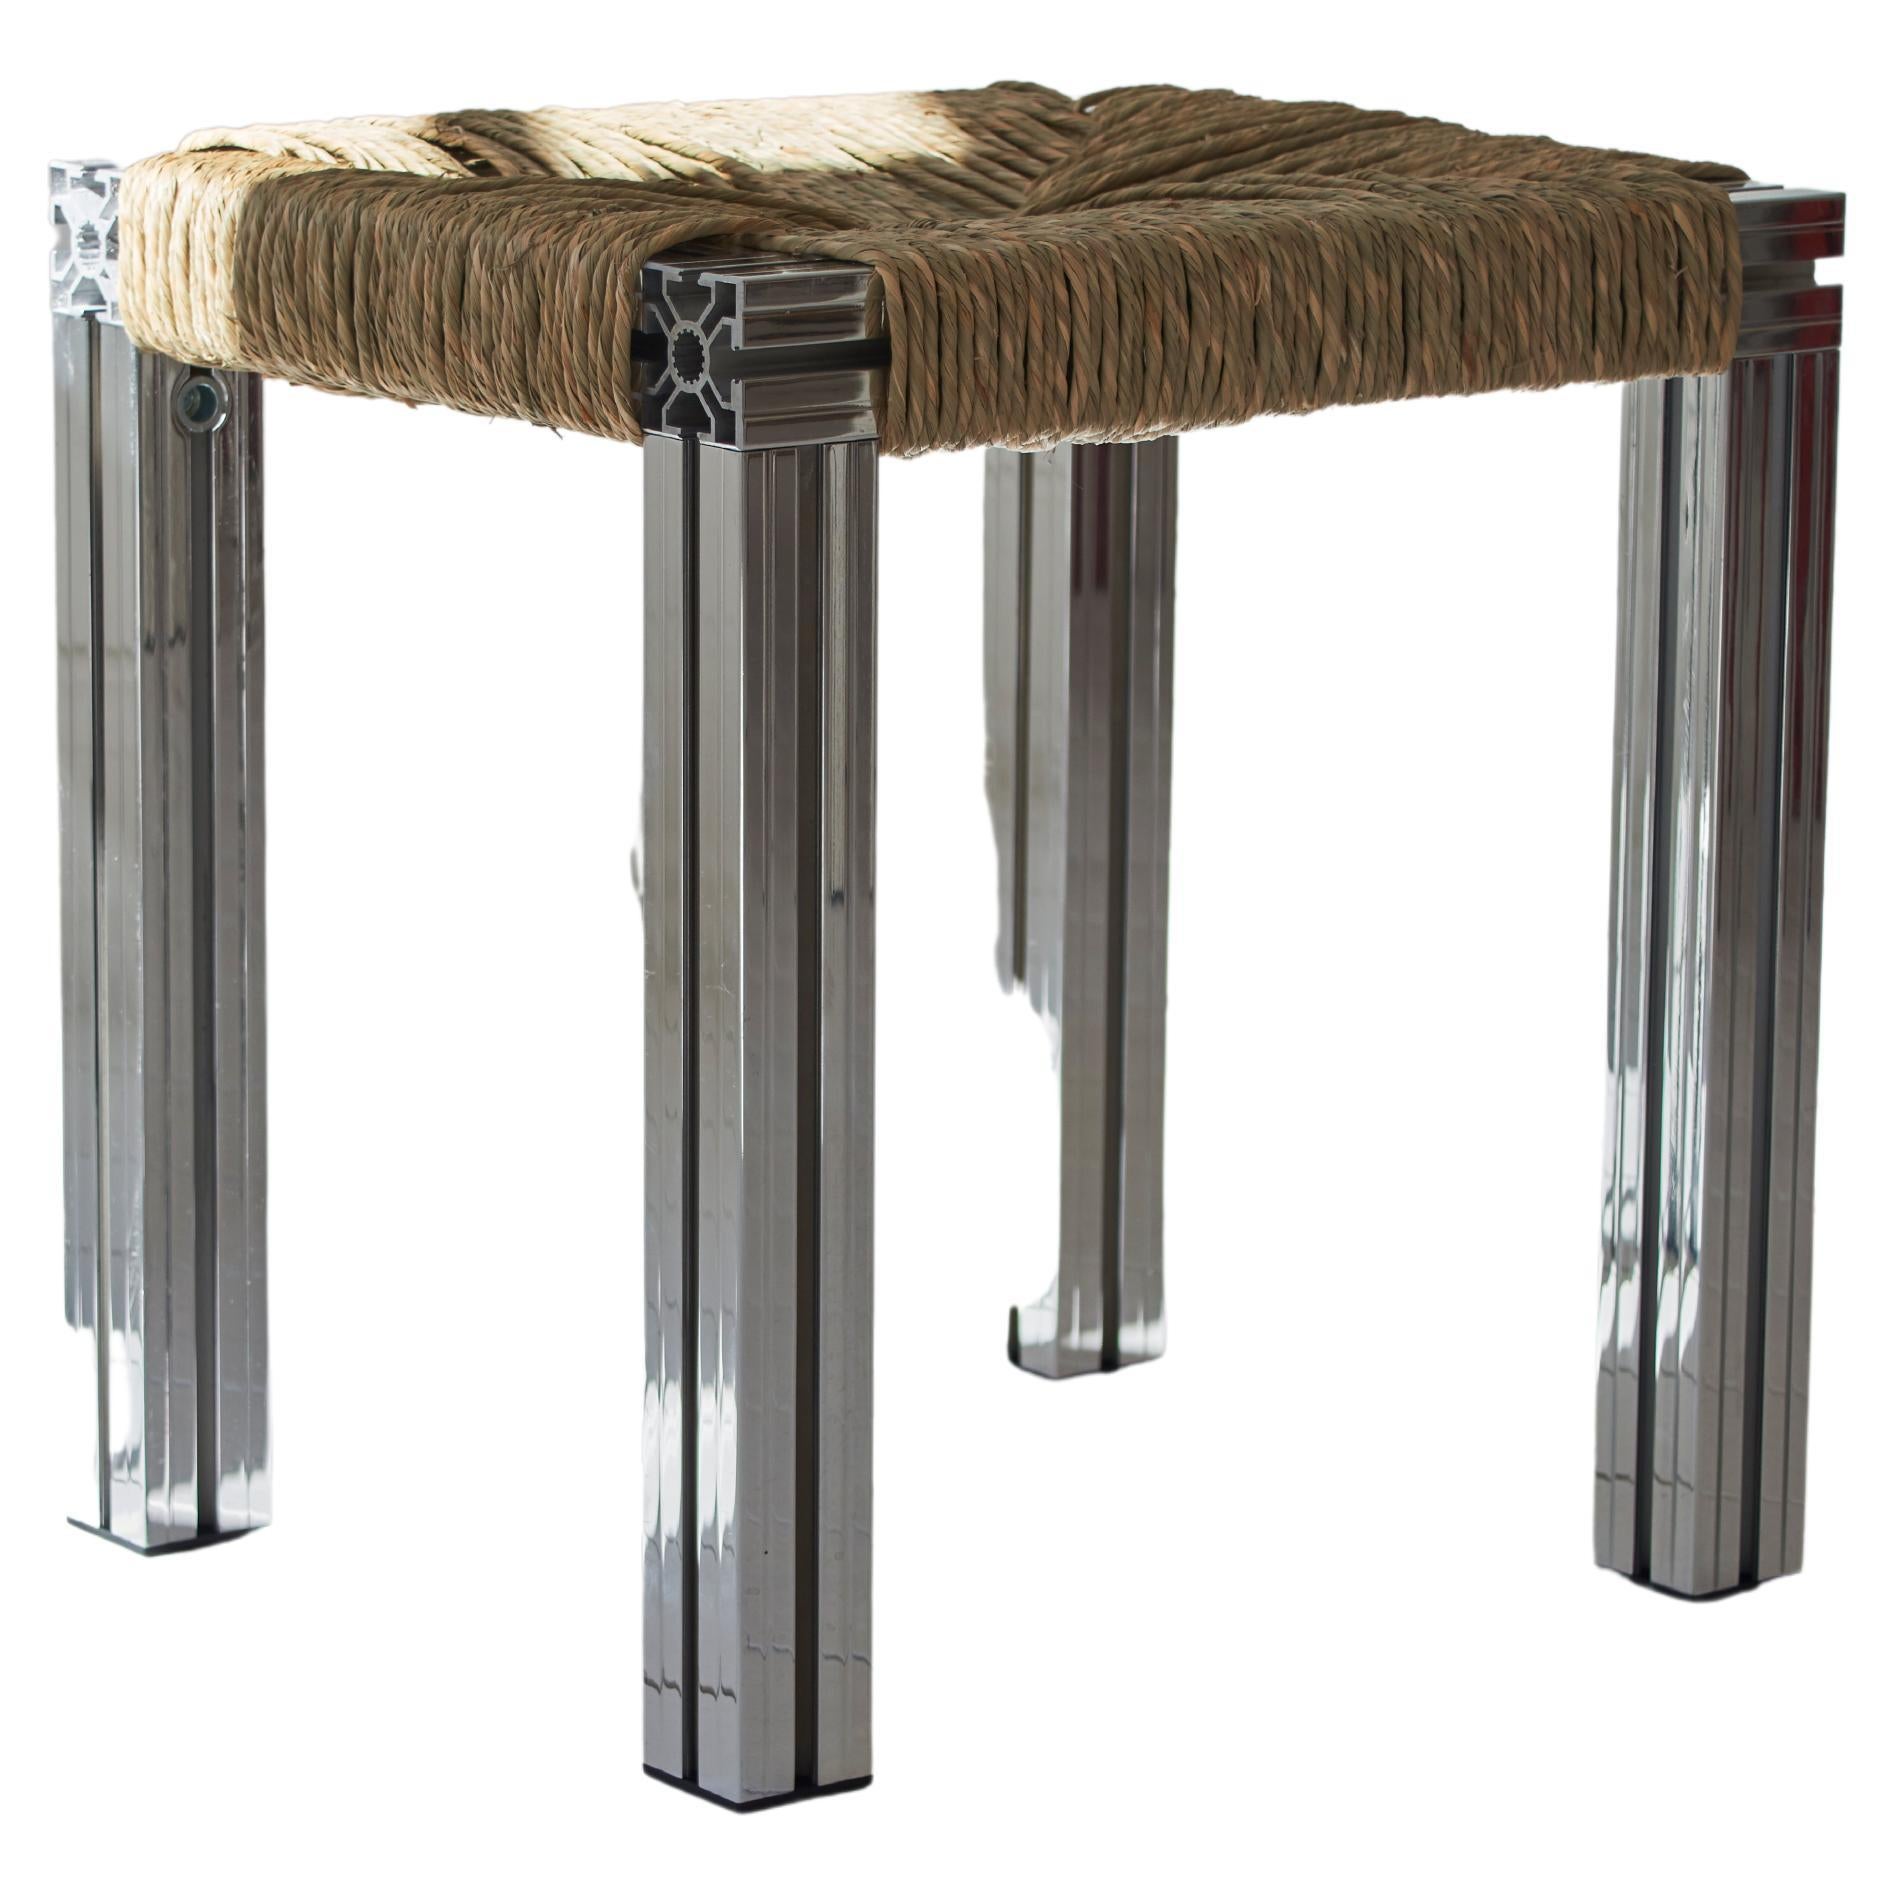 Mirror Polished and Rush Weave Wicker Stool by Tino Seubert